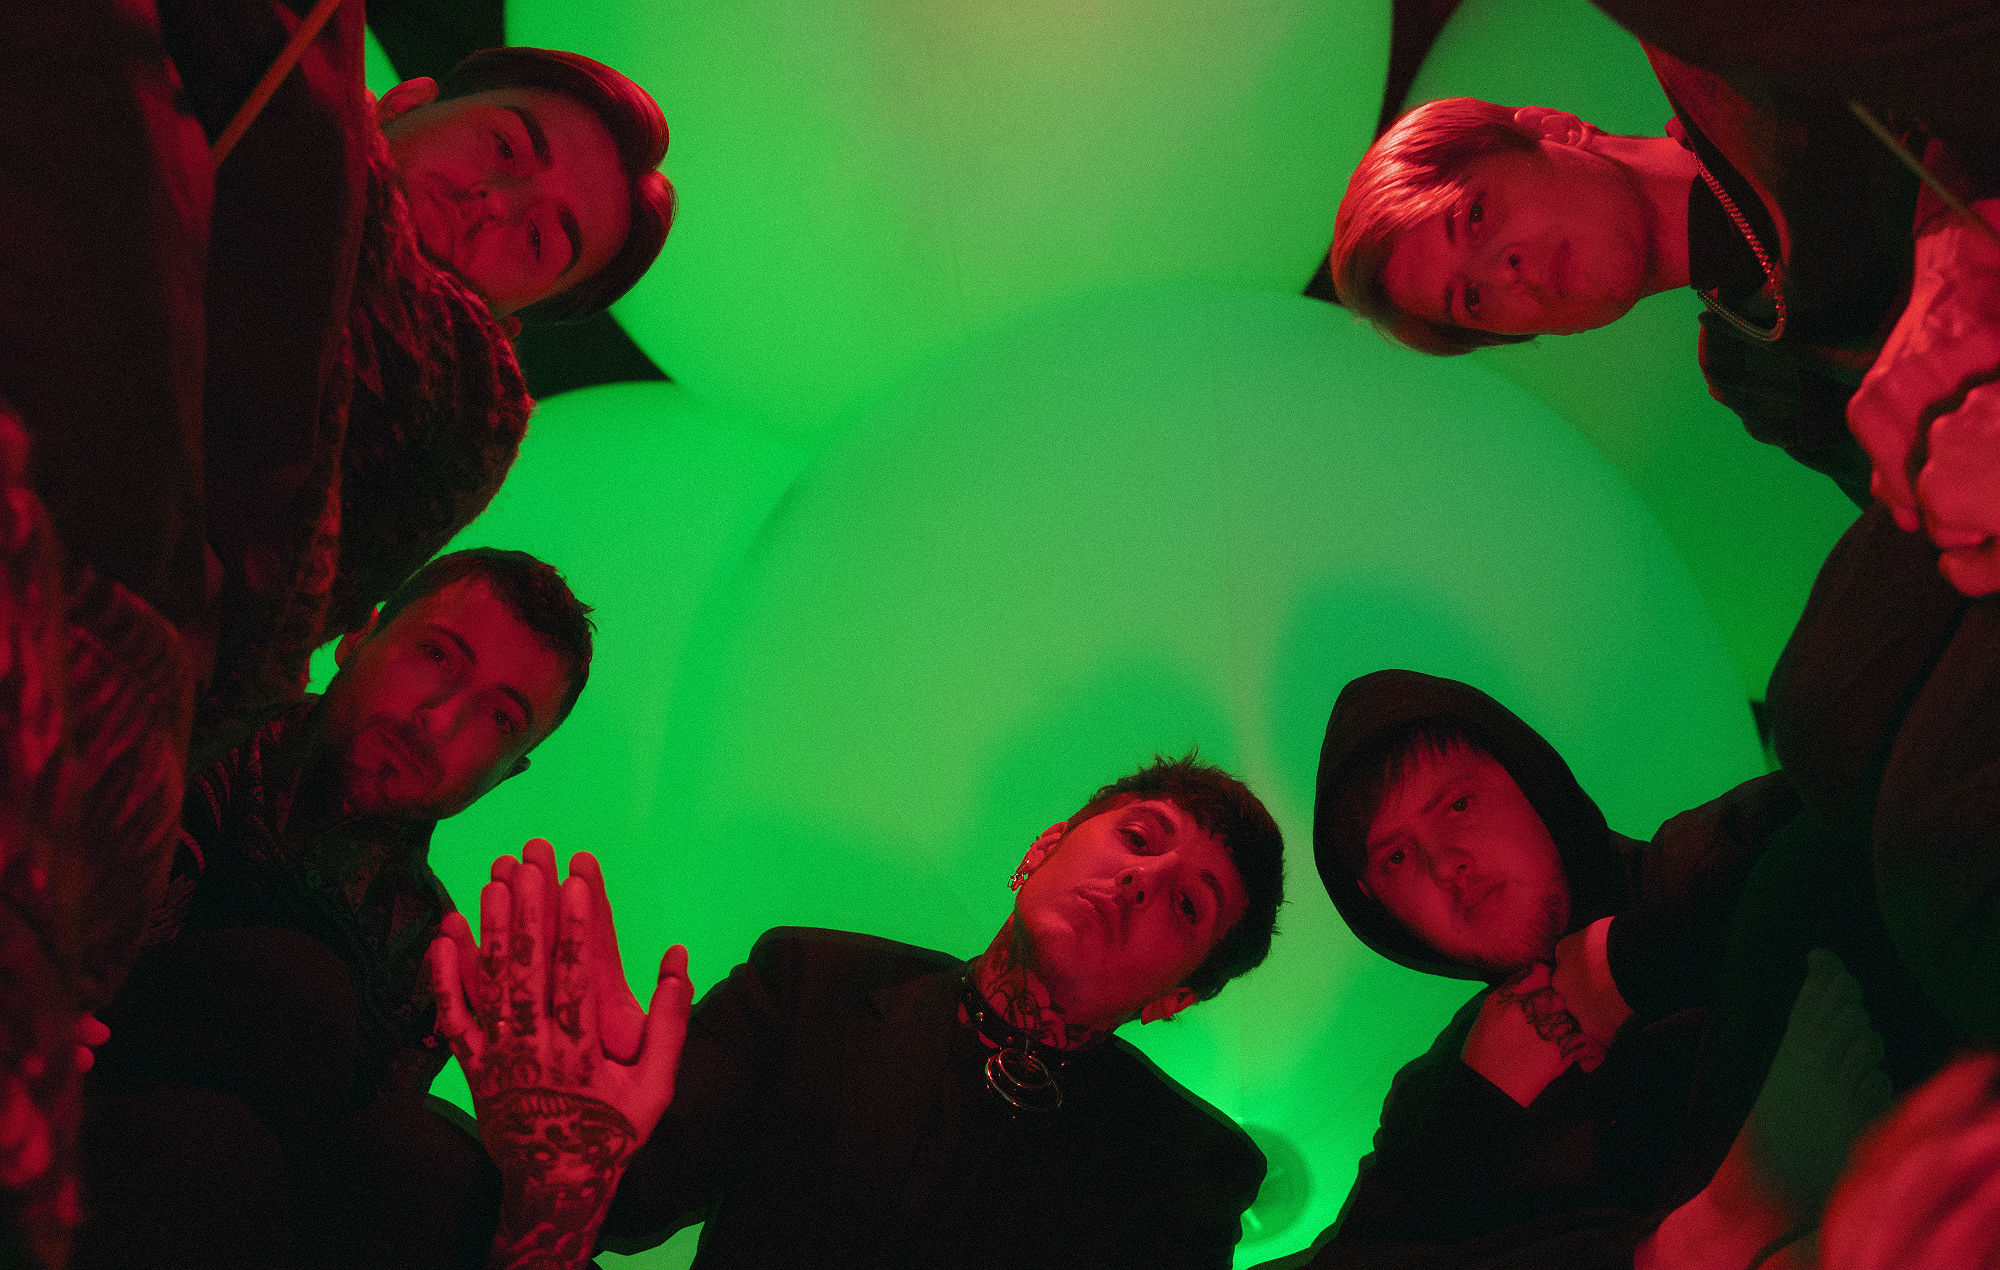 BRING ME THE HORIZON UNLEASH MUSIC VIDEO FOR NEW SINGLE “PARASITE EVE”; ANNOUNCE ‘POST HUMAN’ EP SERIES